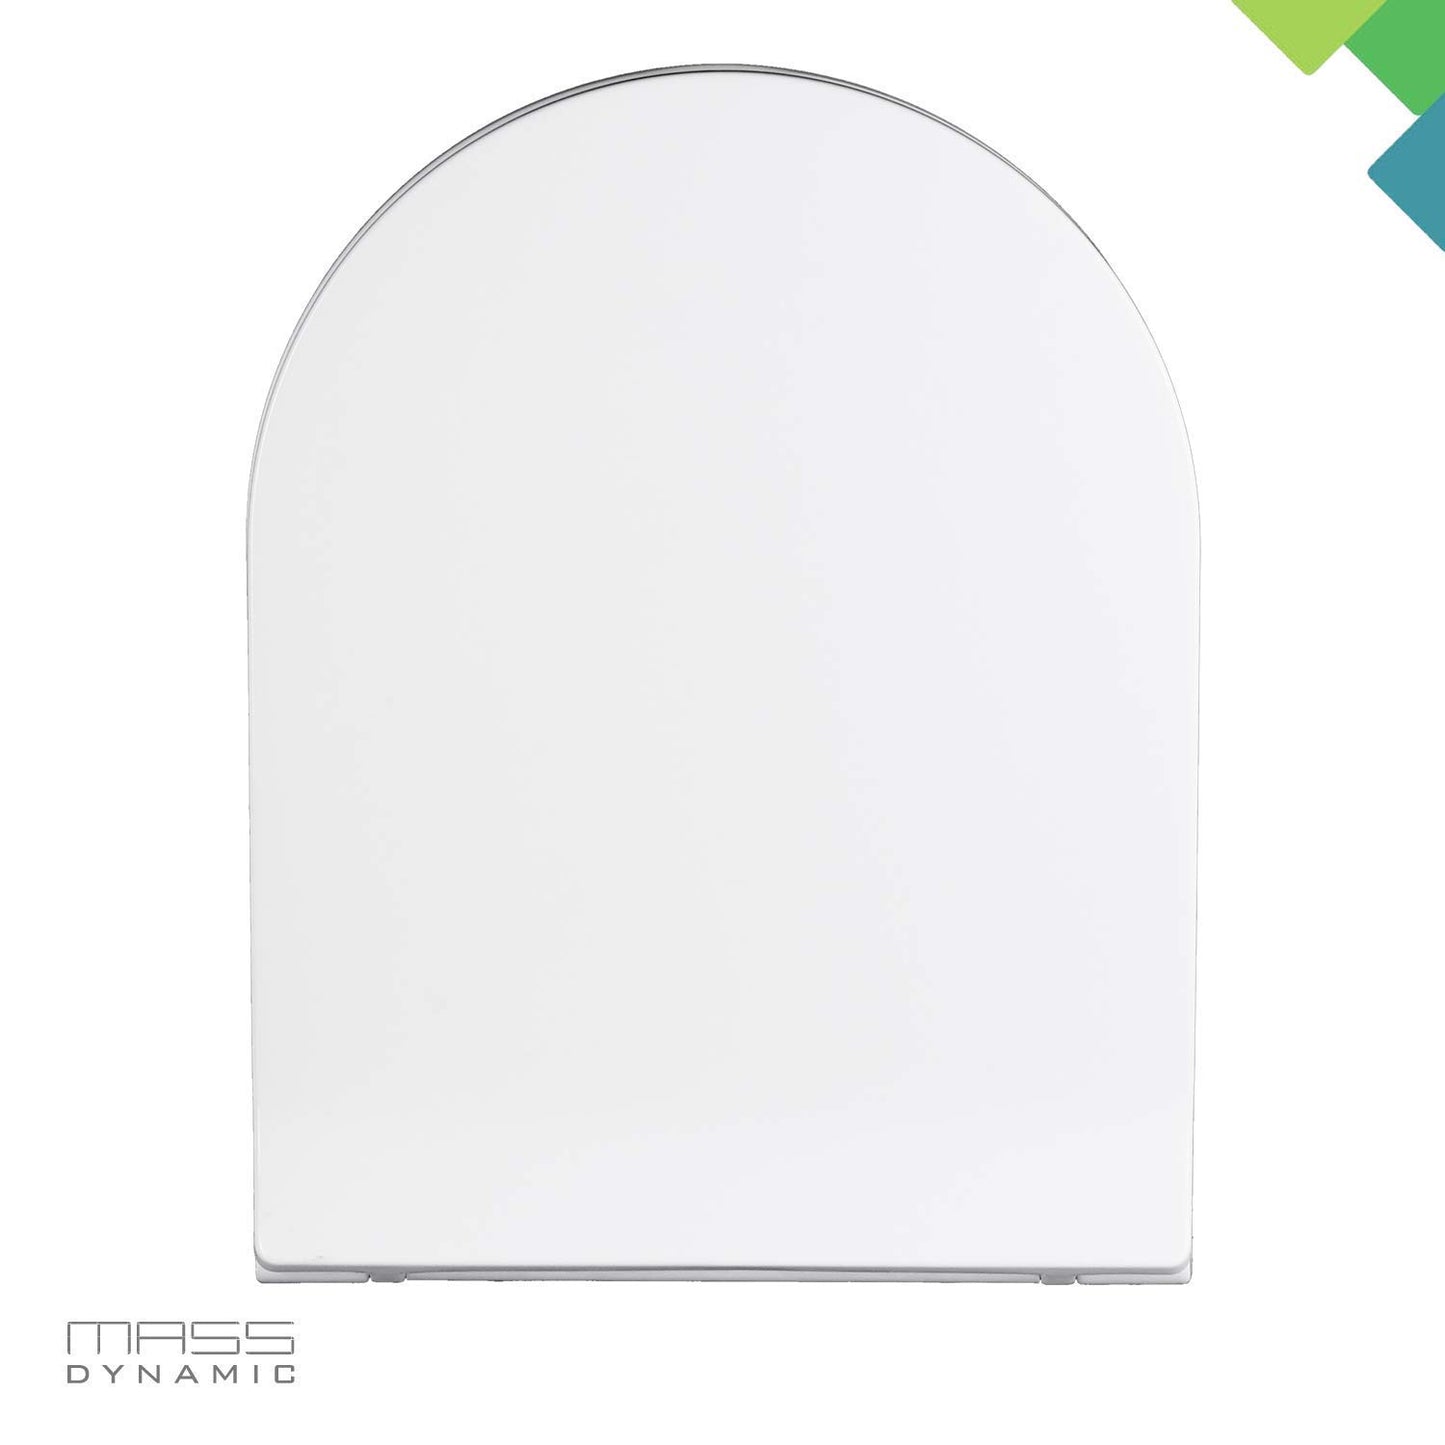 D-Shape (White) Toilet Seat with Soft Close & Quick Release Hinges, PP Material, Easy Installation by Mass Dynamic